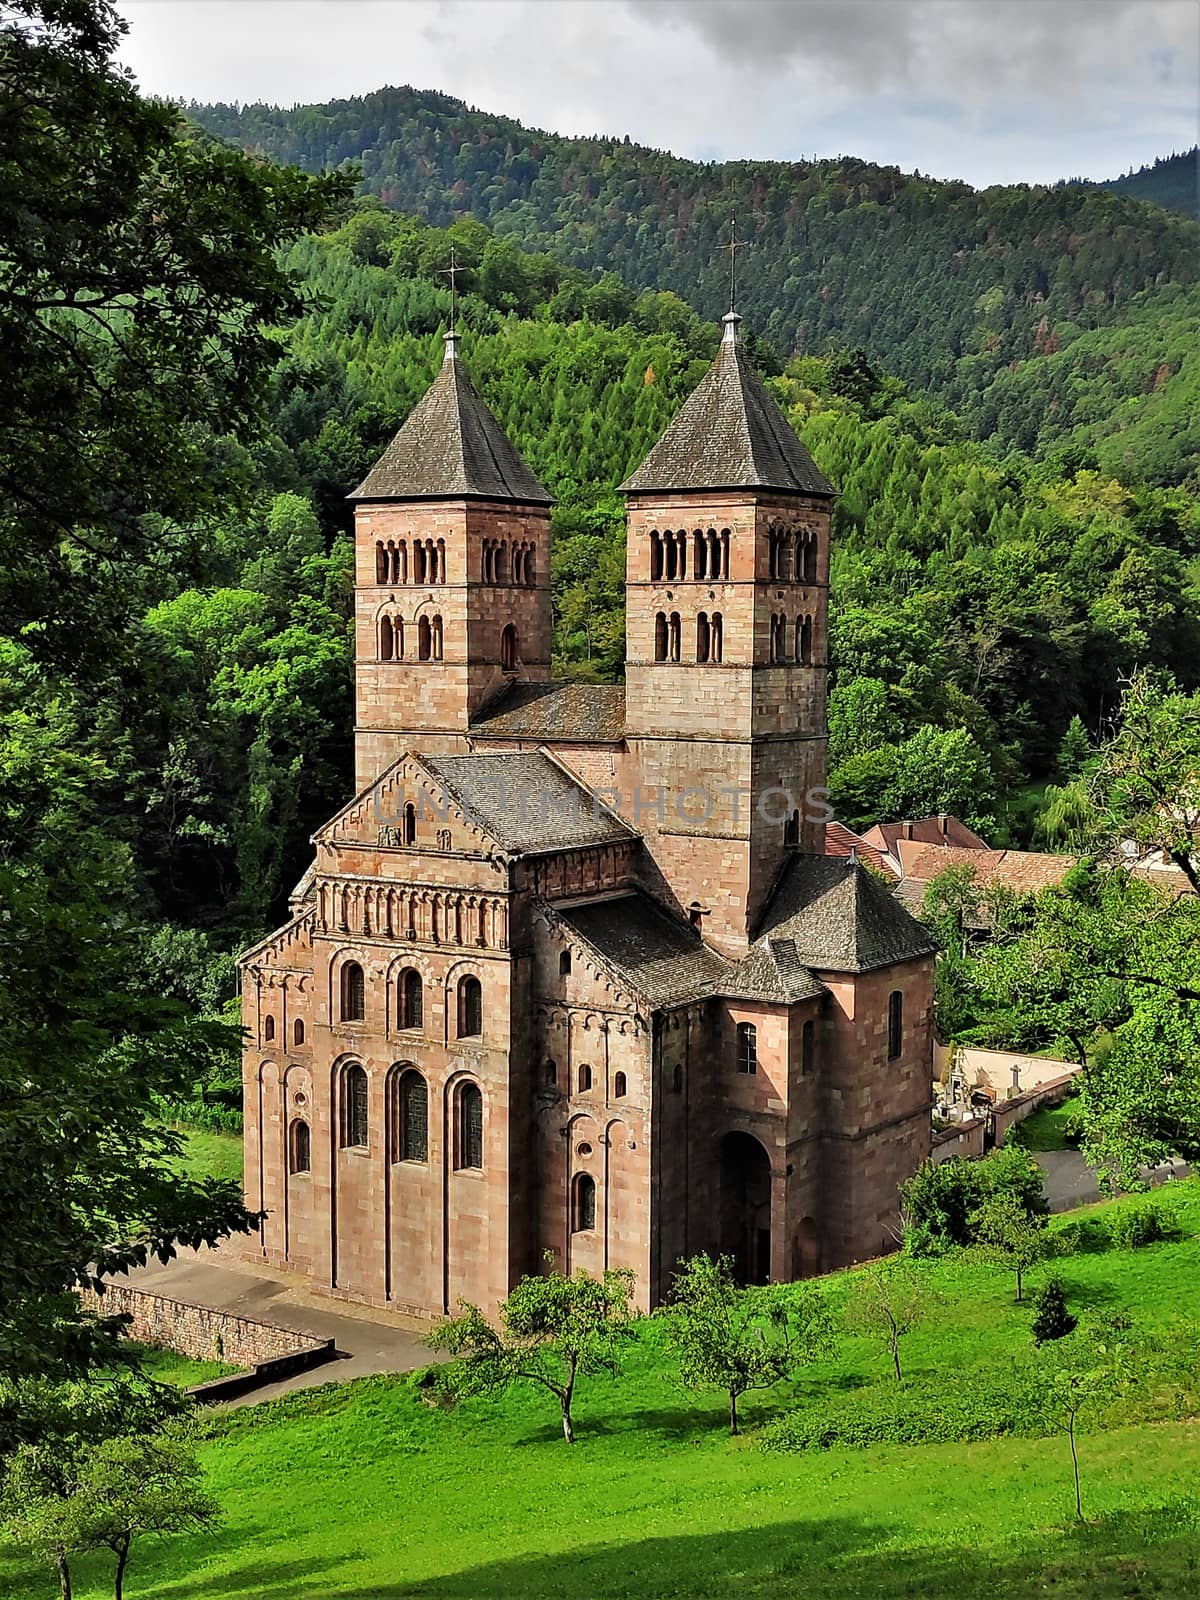 Murbach Abbey in the Alsace, France is located beautifully surrounded by green hills of the Vosges